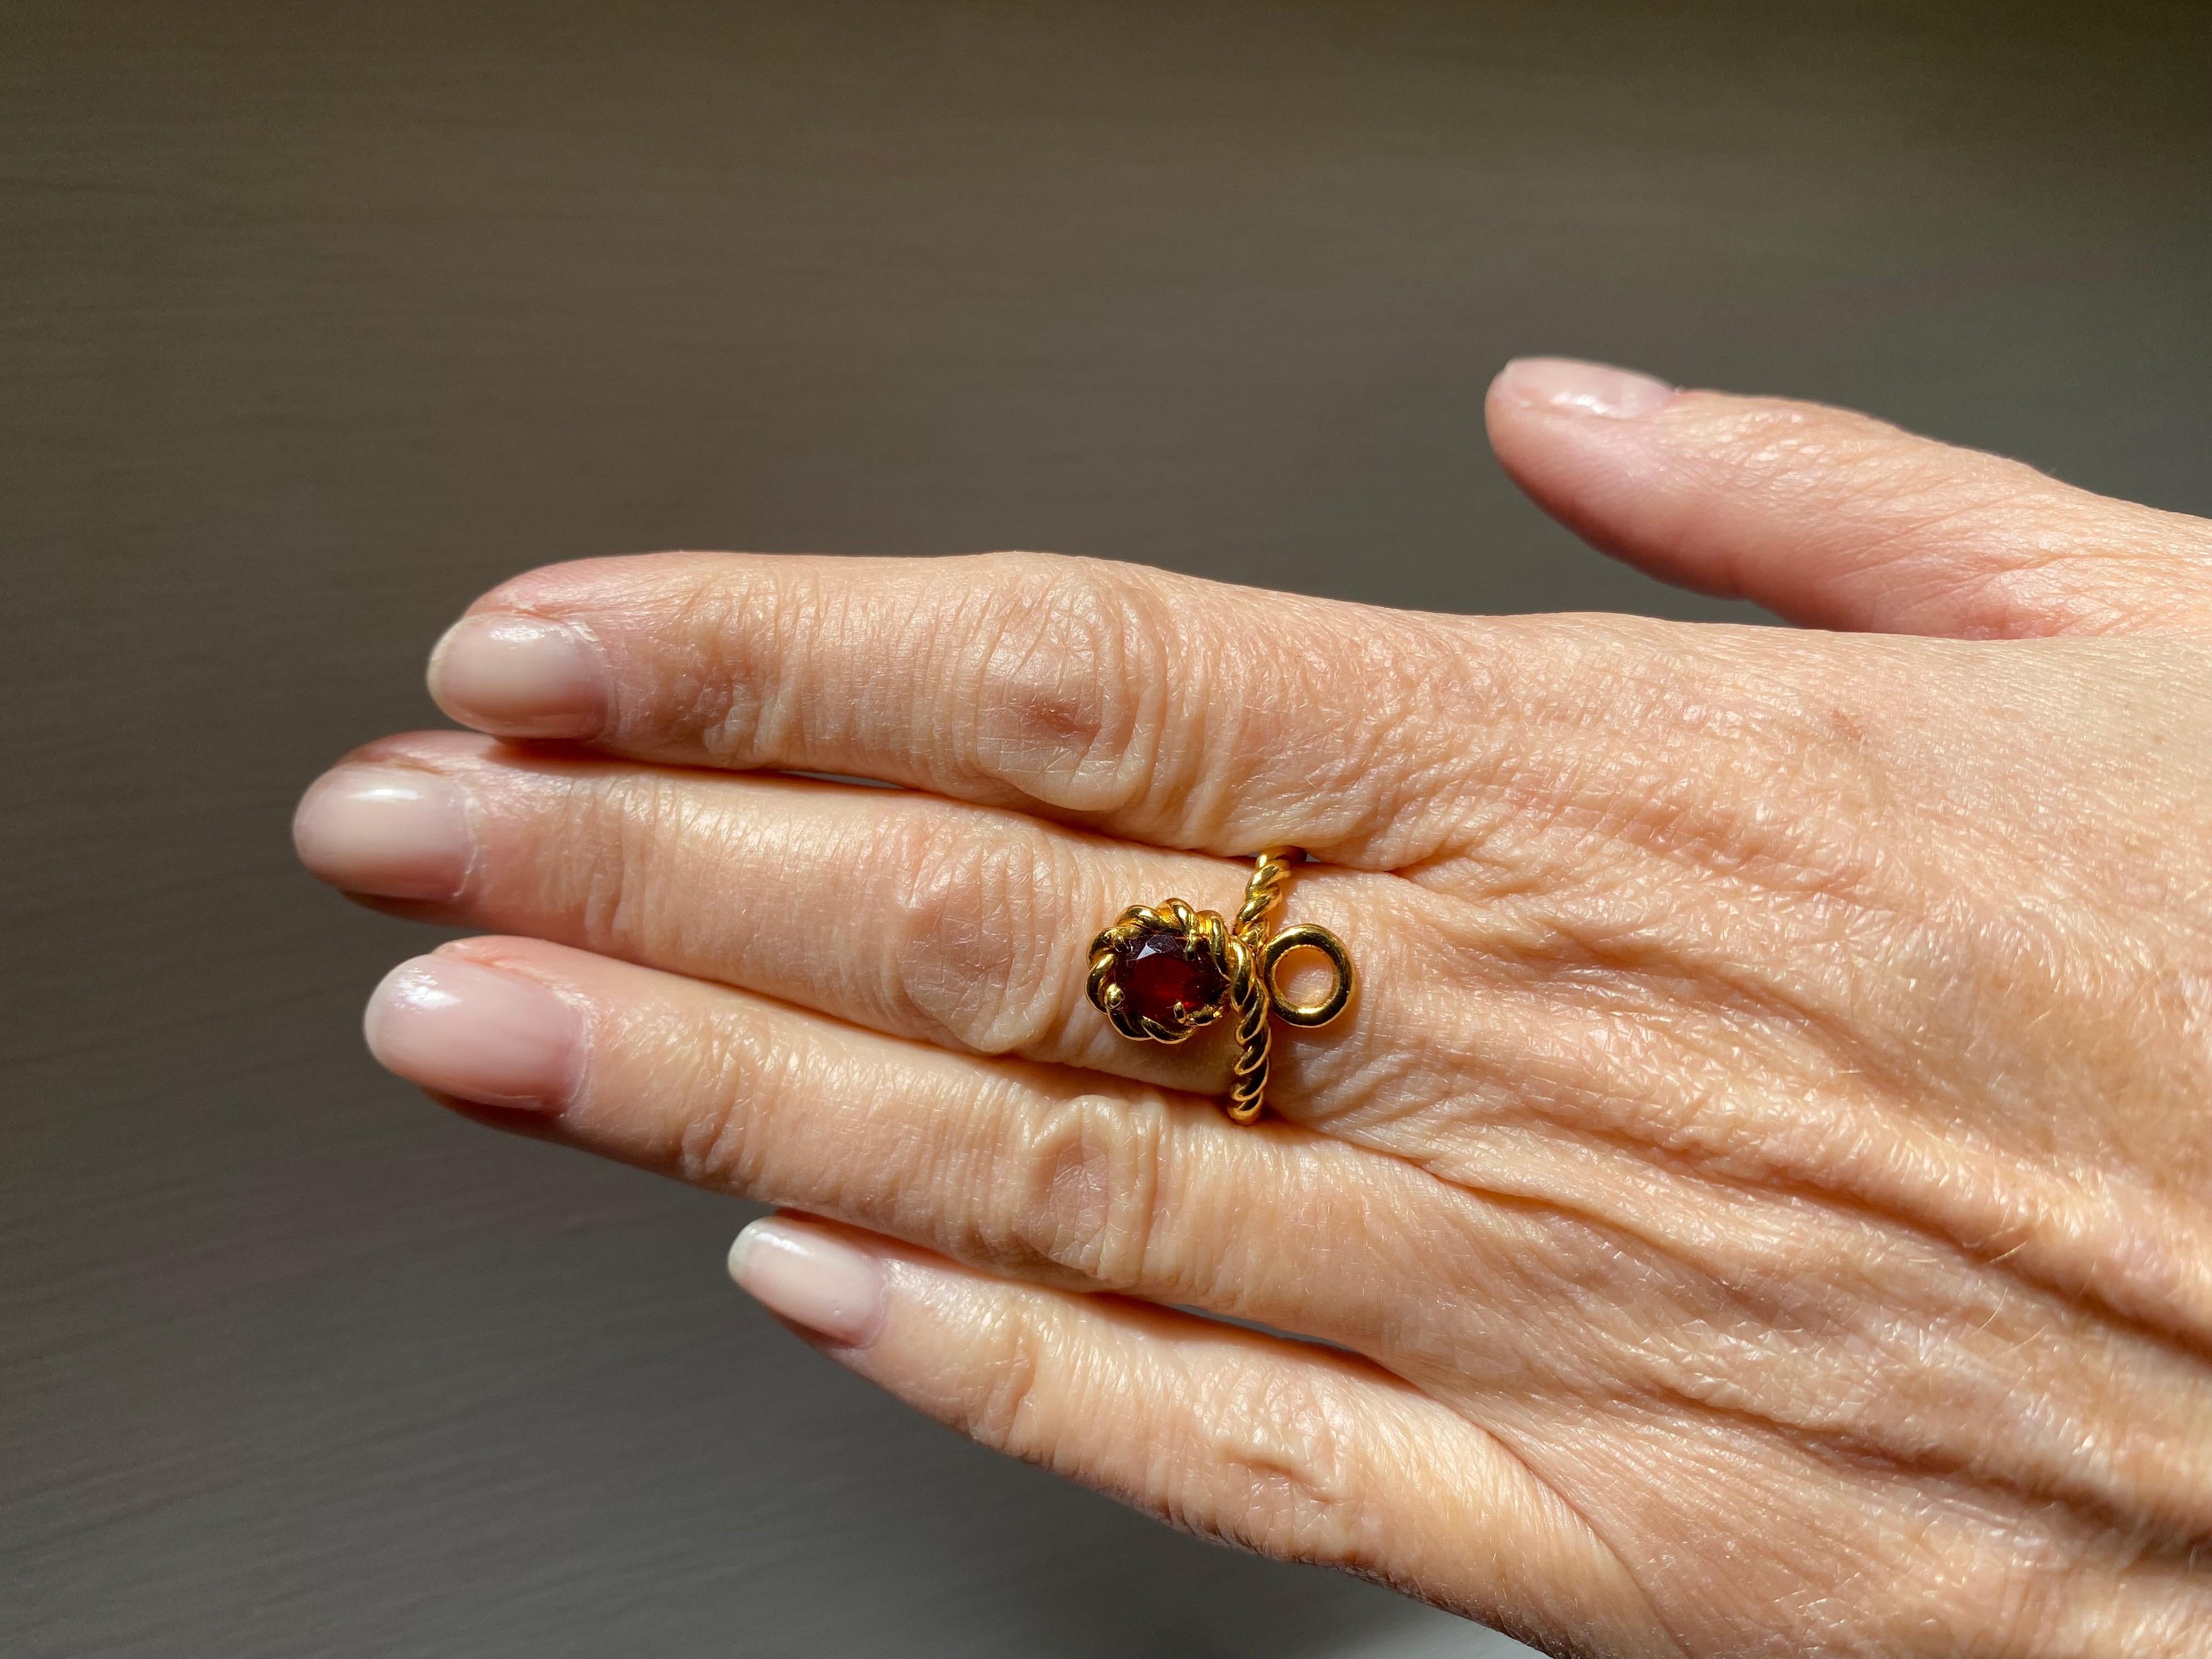 Rossella Ugolini Design Collection a beautiful pear cut Garnet Design, Ring handcrafted in a 18 Karats Yellow Gold twisted rope that makes a single line around the finger and surrounds the deep bordeaux pear cut Garnet deep red stone. Elegant and